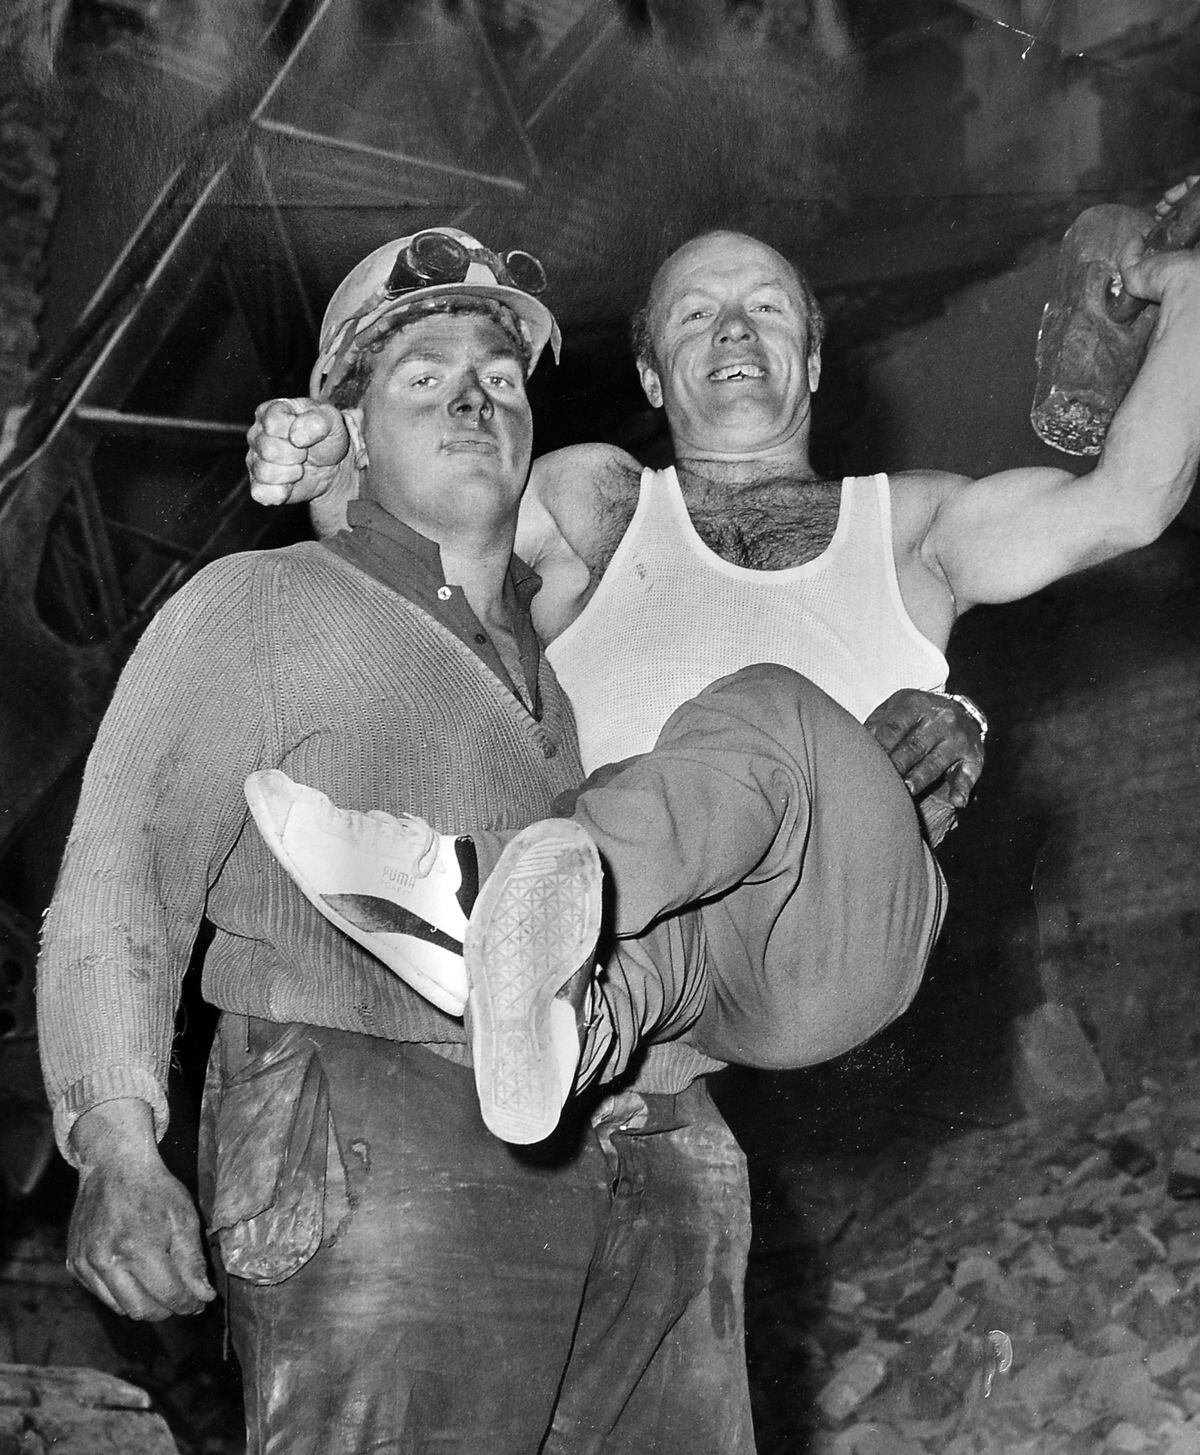 One of this pair is a circus strongman, but it's not the one you think. It's January 12, 1971, and Ivan Karle, at 4ft 10ins "the world's smallest strongman" and a member of Robert Brothers circus which was entertaining at the Granada at Shrewsbury at the time, had just lifted "Big Bob," a 21 stone, 6ft 6ins demolition worker at the old Shirehall demolition site, 18 inches off the ground and held him. Add the weight of Ivan's two stone lifting table, and the total was 23 stone, over twice the strongman's own weight. Afterwards Bob swept Ivan into the air to show his appreciation. 